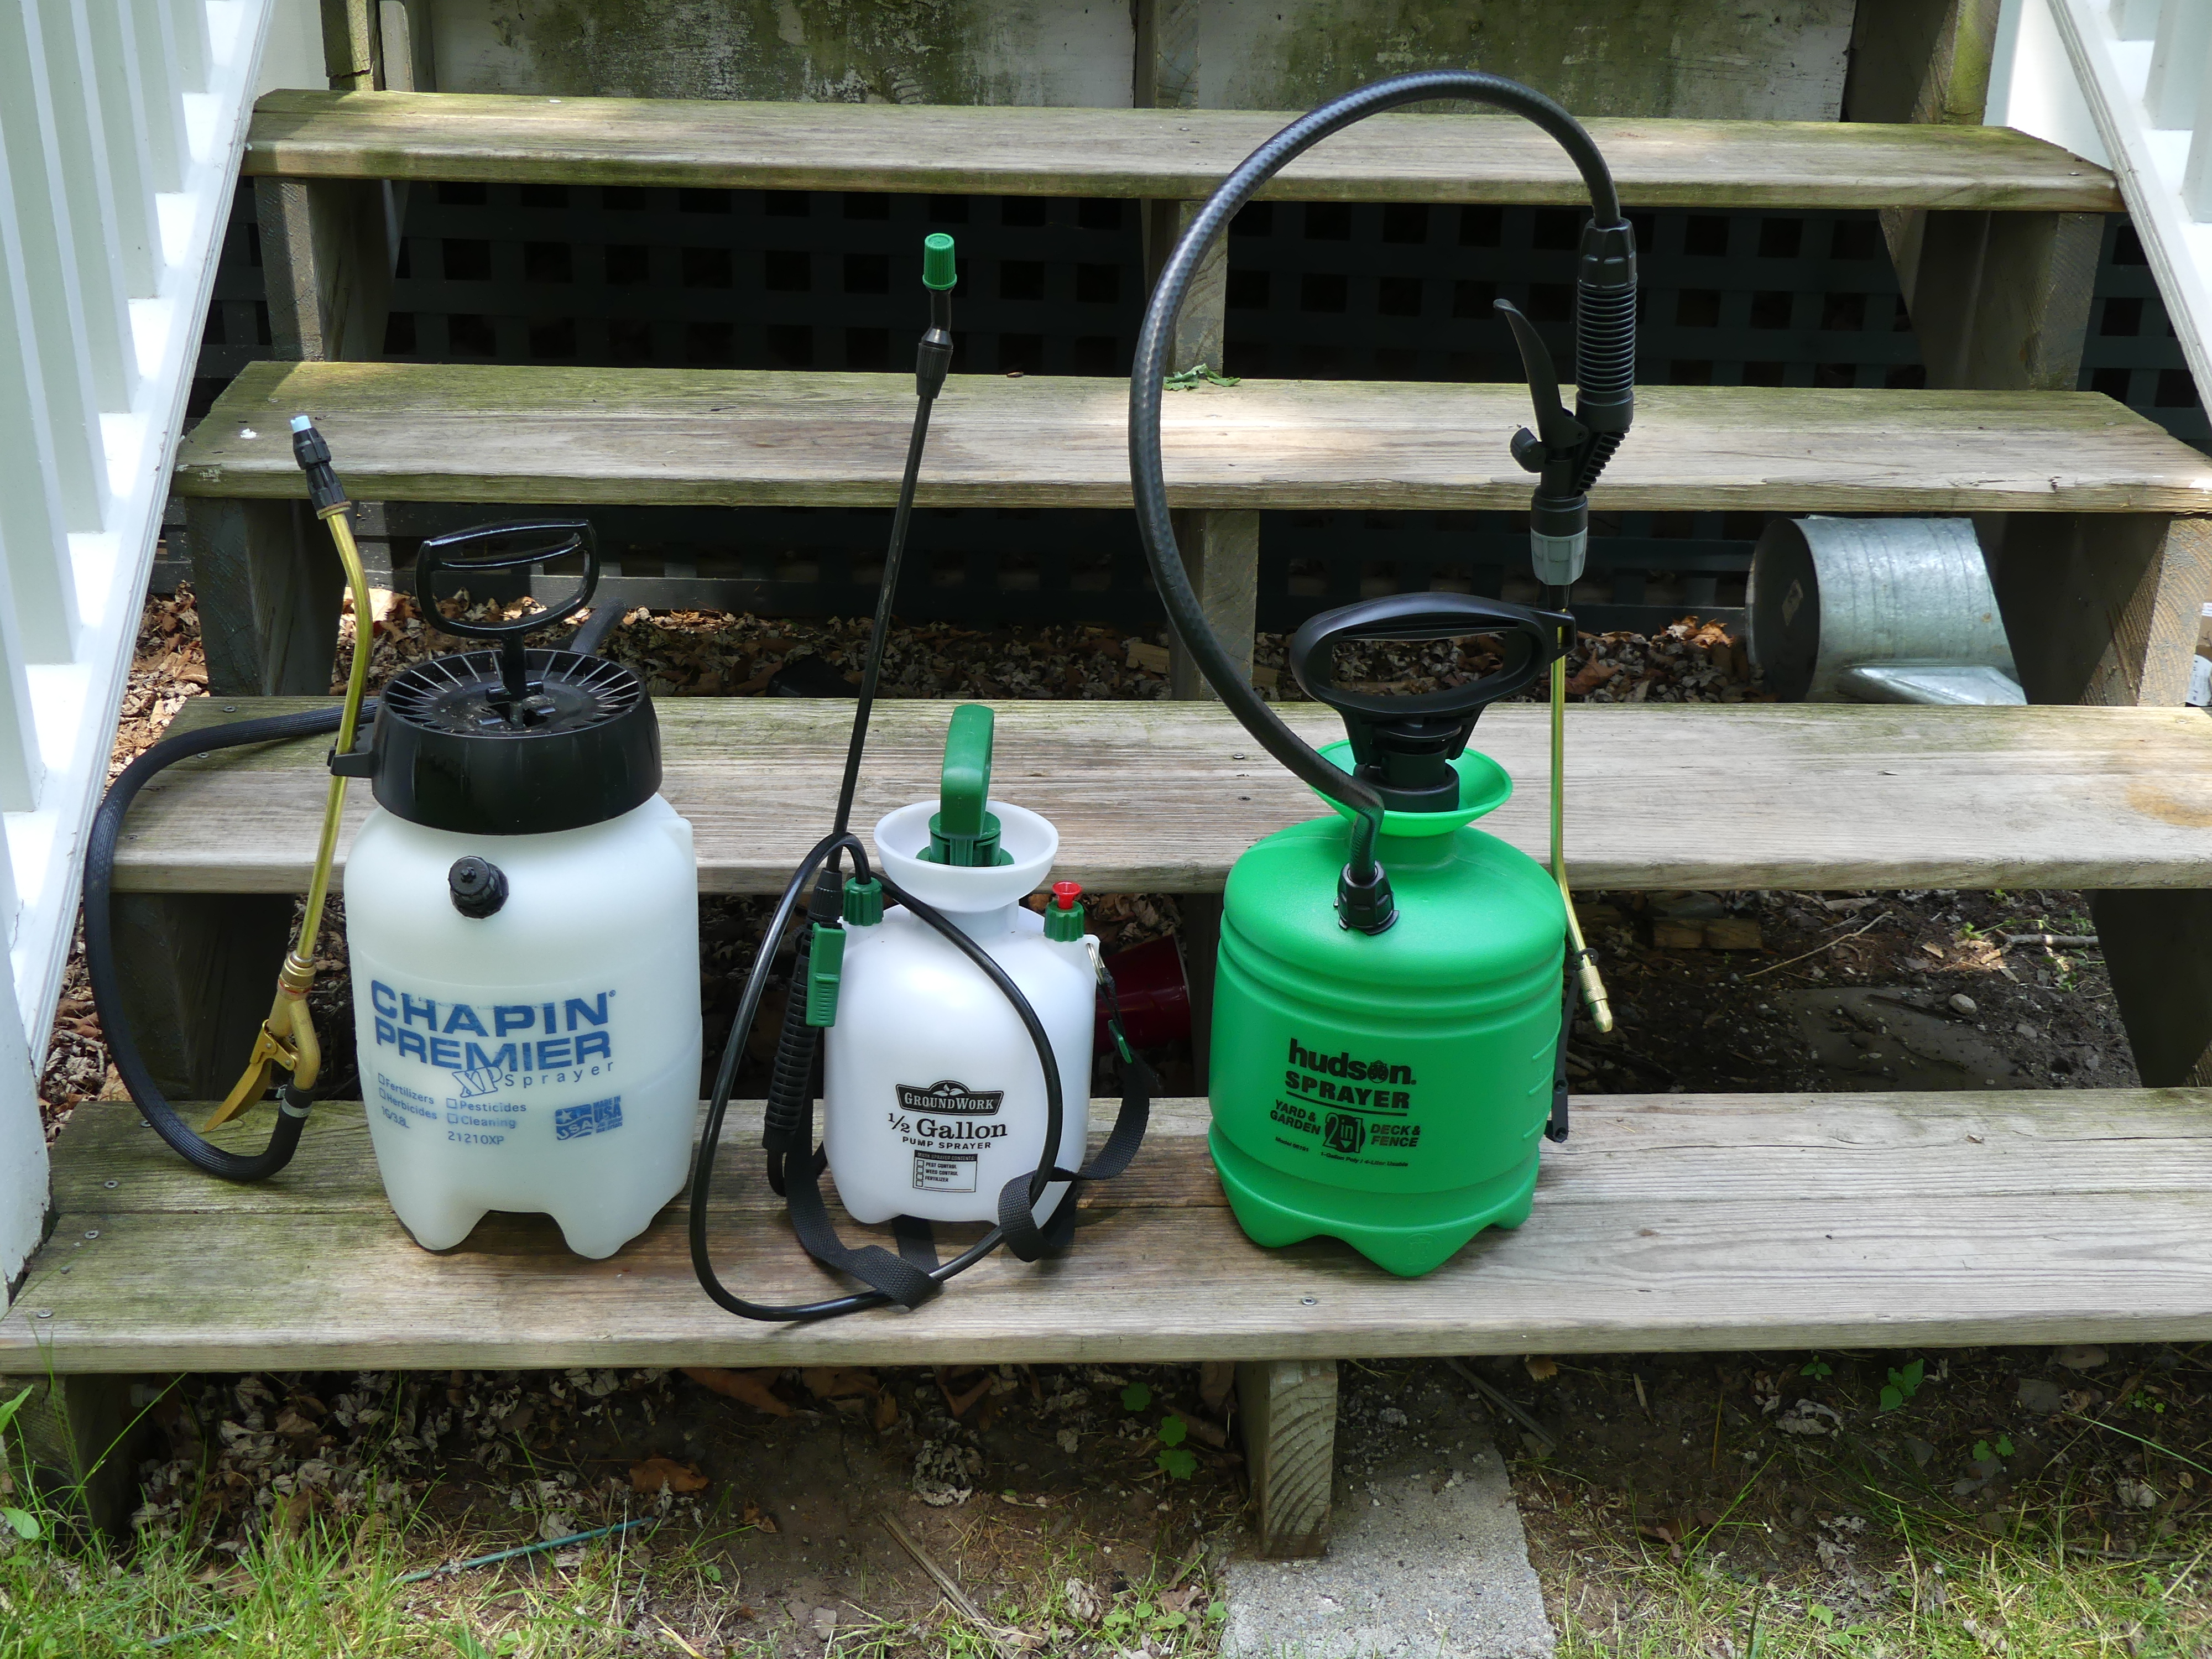 The Chapin Premier, at left, is one of the more expensive 1-gallon sprayers, but it has a relief valve, metal trigger and Chapin makes nozzle heads that can be changed out to control spray patterns. The Groundwork is a half-gallon sprayer and while it too has a relief valve the spray pattern from the nozzle leaves much to be desired. The Hudson gallon sprayer, at right, has no relief valve but clear level markings on the tank and a preferred brass spray nozzle and two extra flat pattern tips. ANDREW MESSINGER